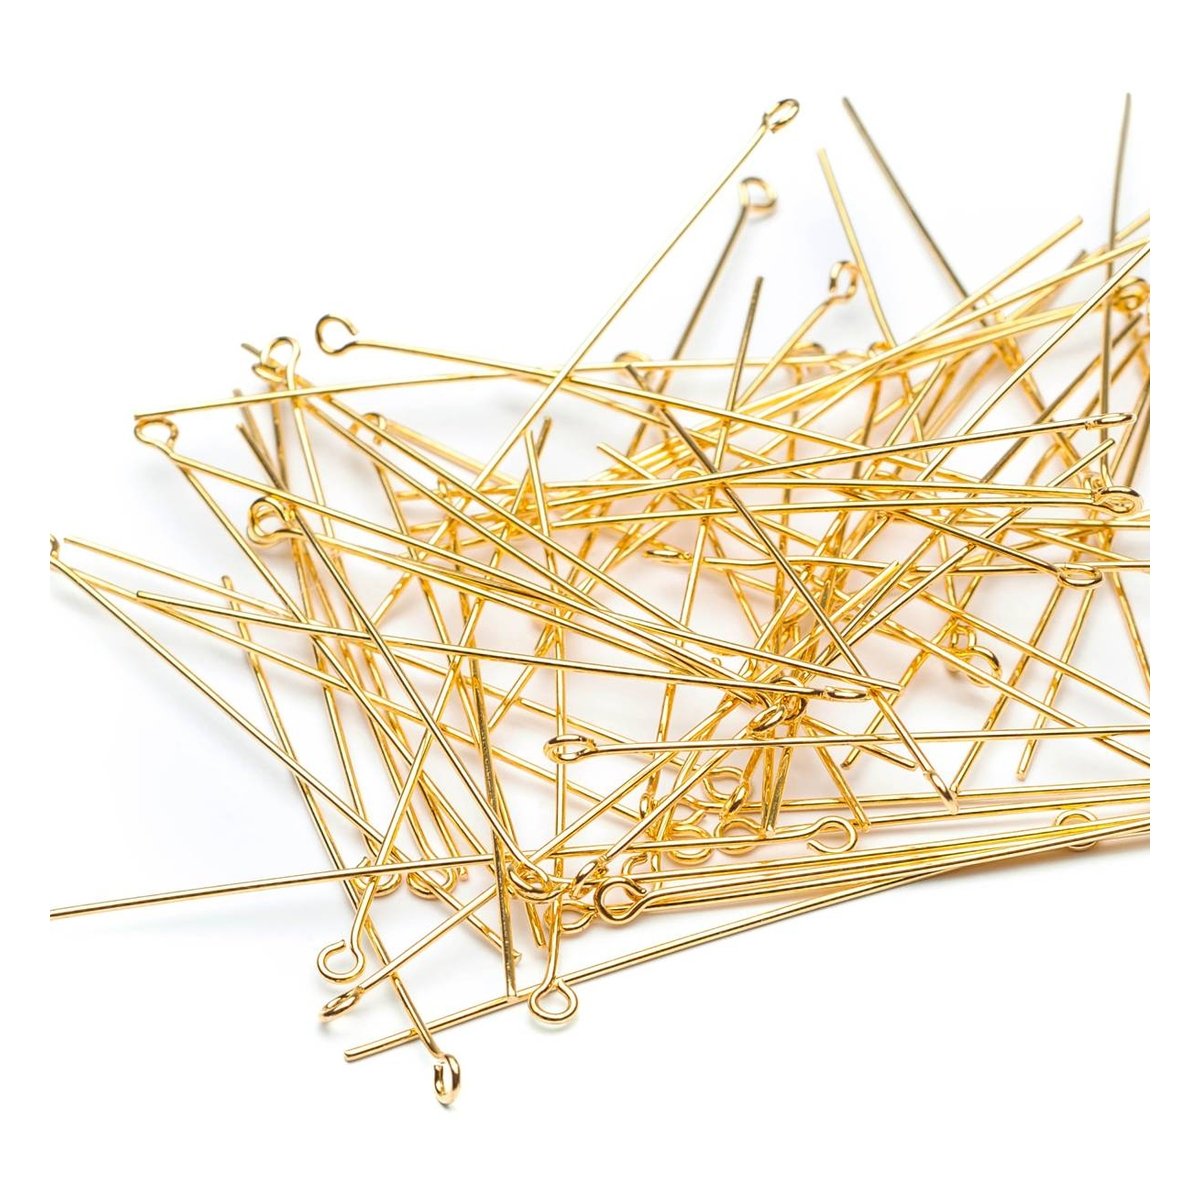 Beads Unlimited Gold Plated Eyepins 50mm 40 Pack